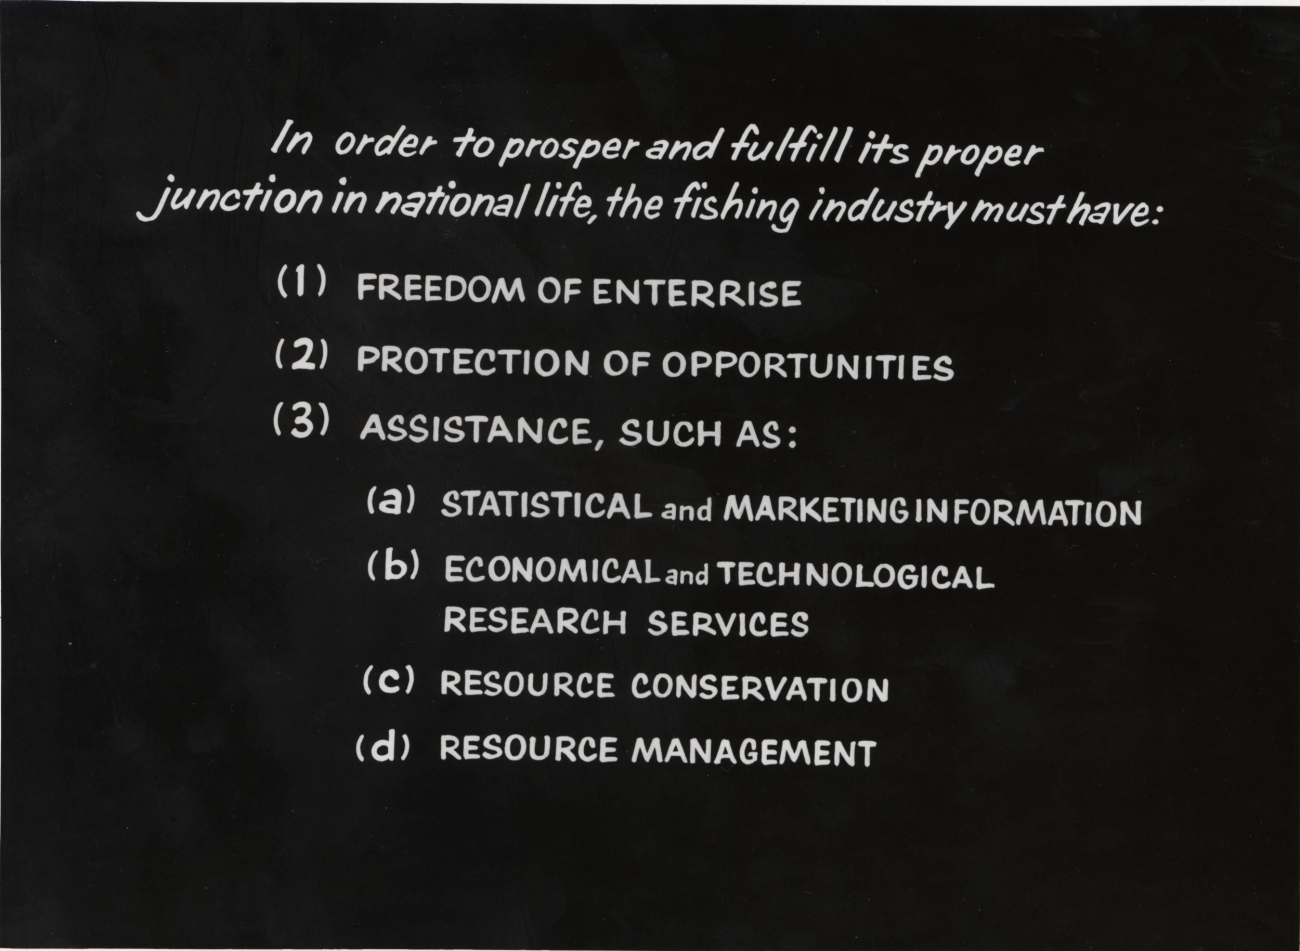 Listing of what the fishing industry must have to fulfill its proper junction